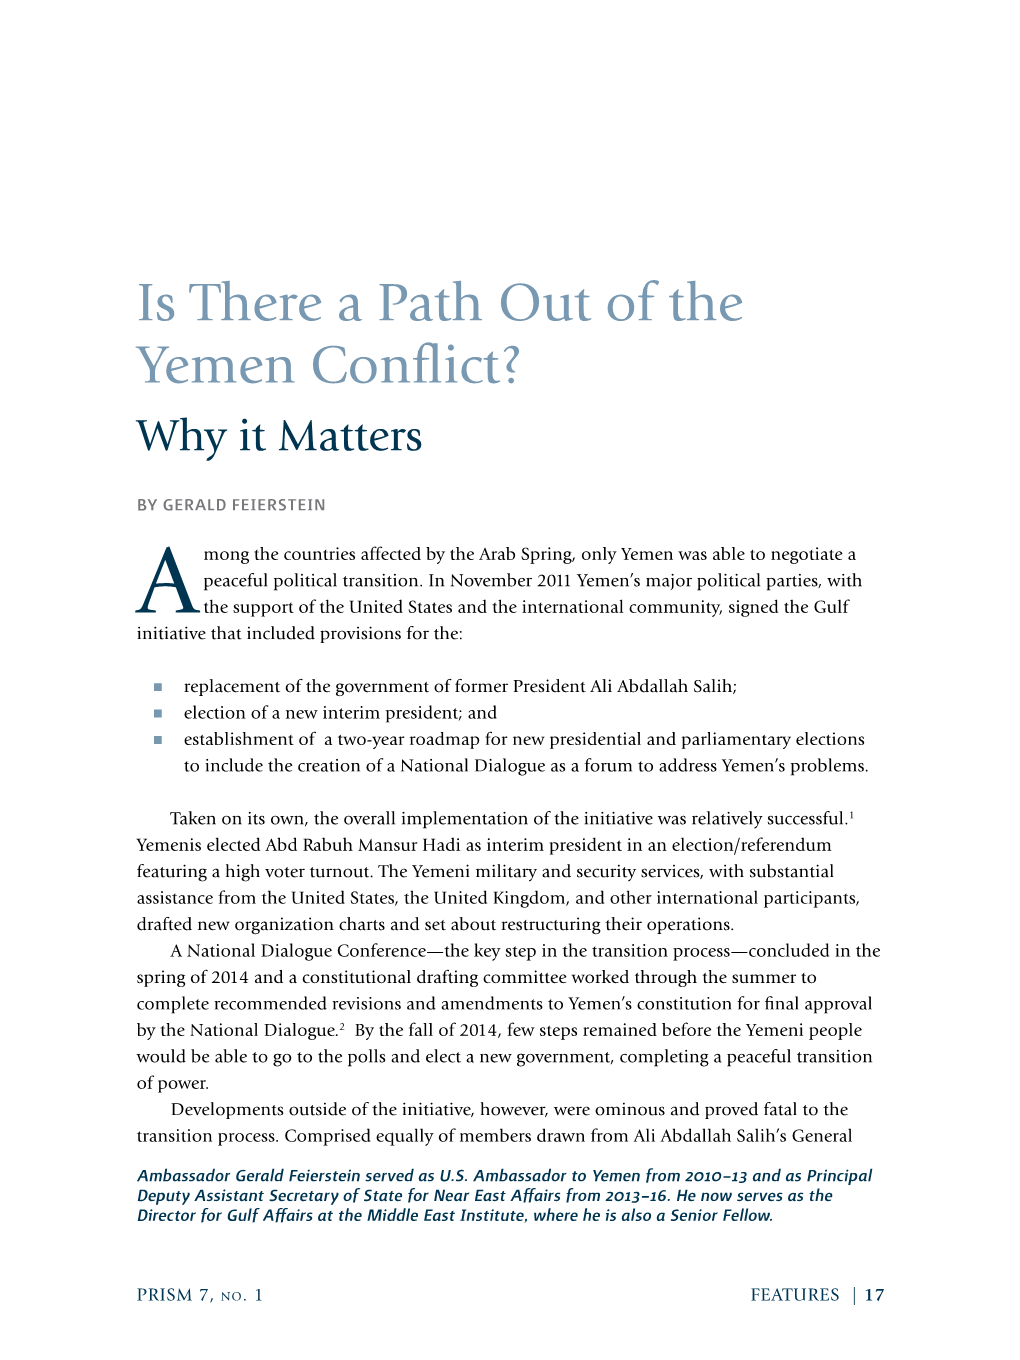 Is There a Path out of the Yemen Conflict? Why It Matters